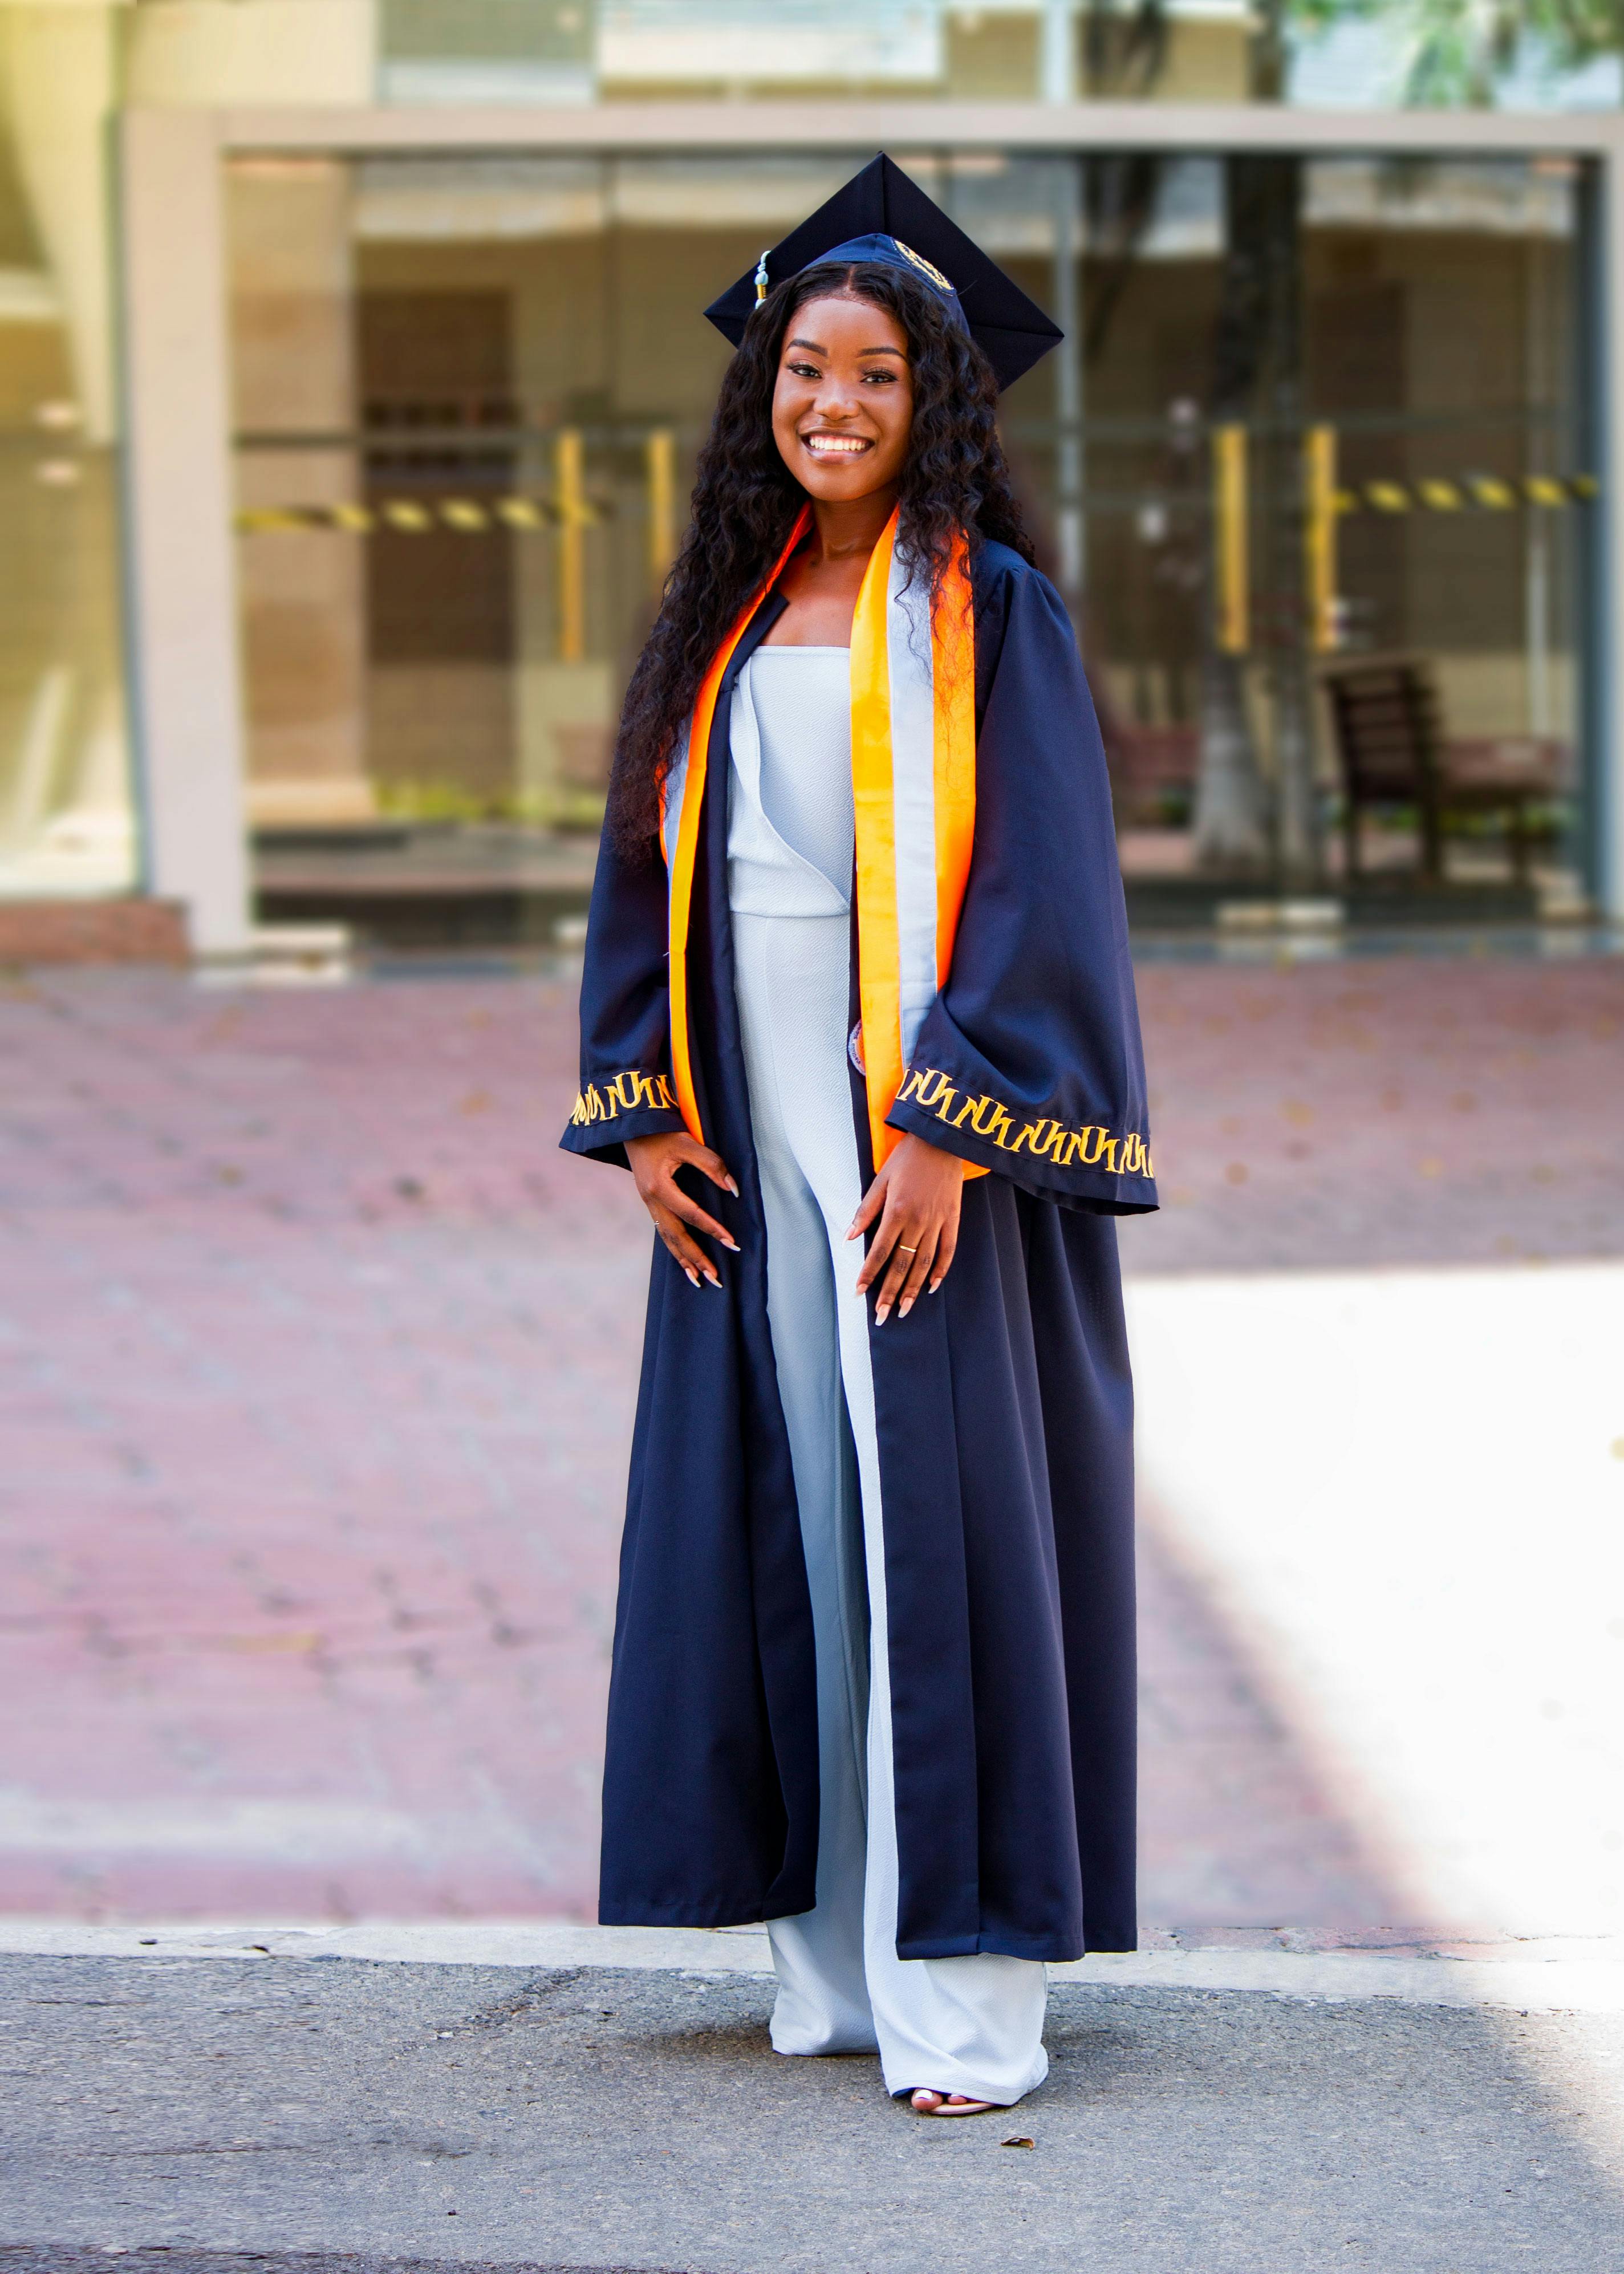 Graduation Dress Guidelines | The University of New Orleans